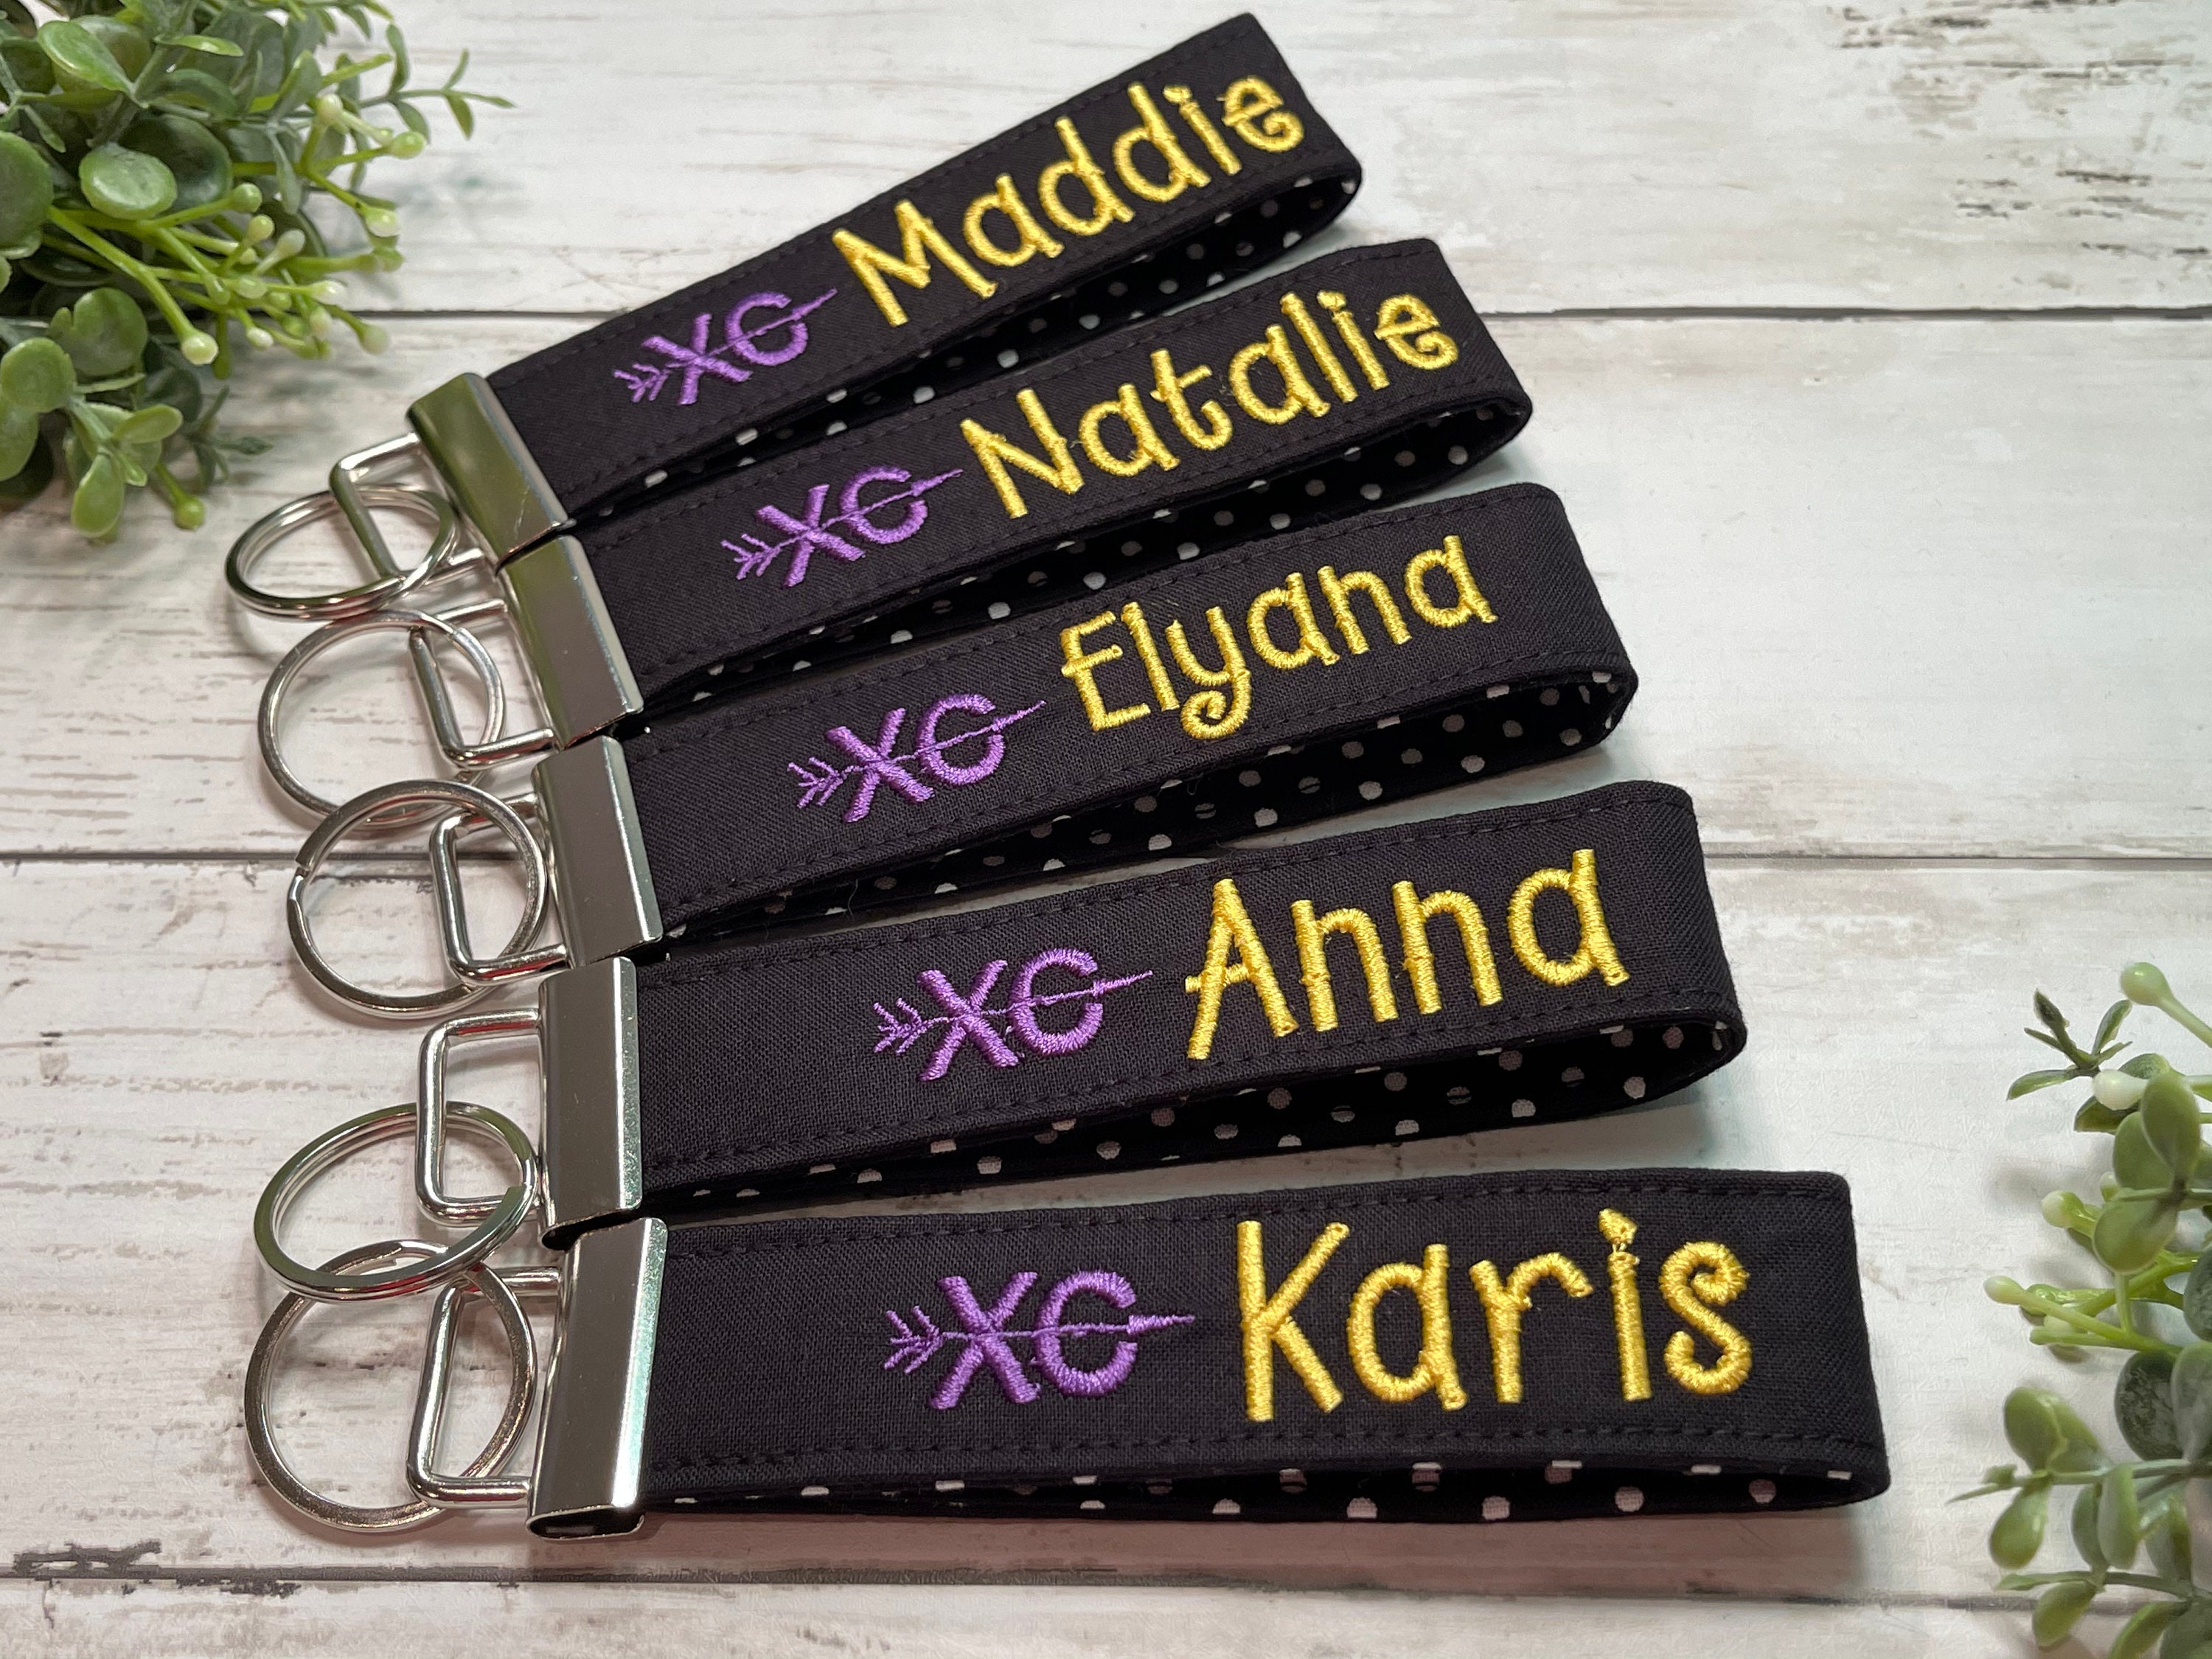 Personalized Name Tags For Bags, Backpacks, Sports Teams, Gifts